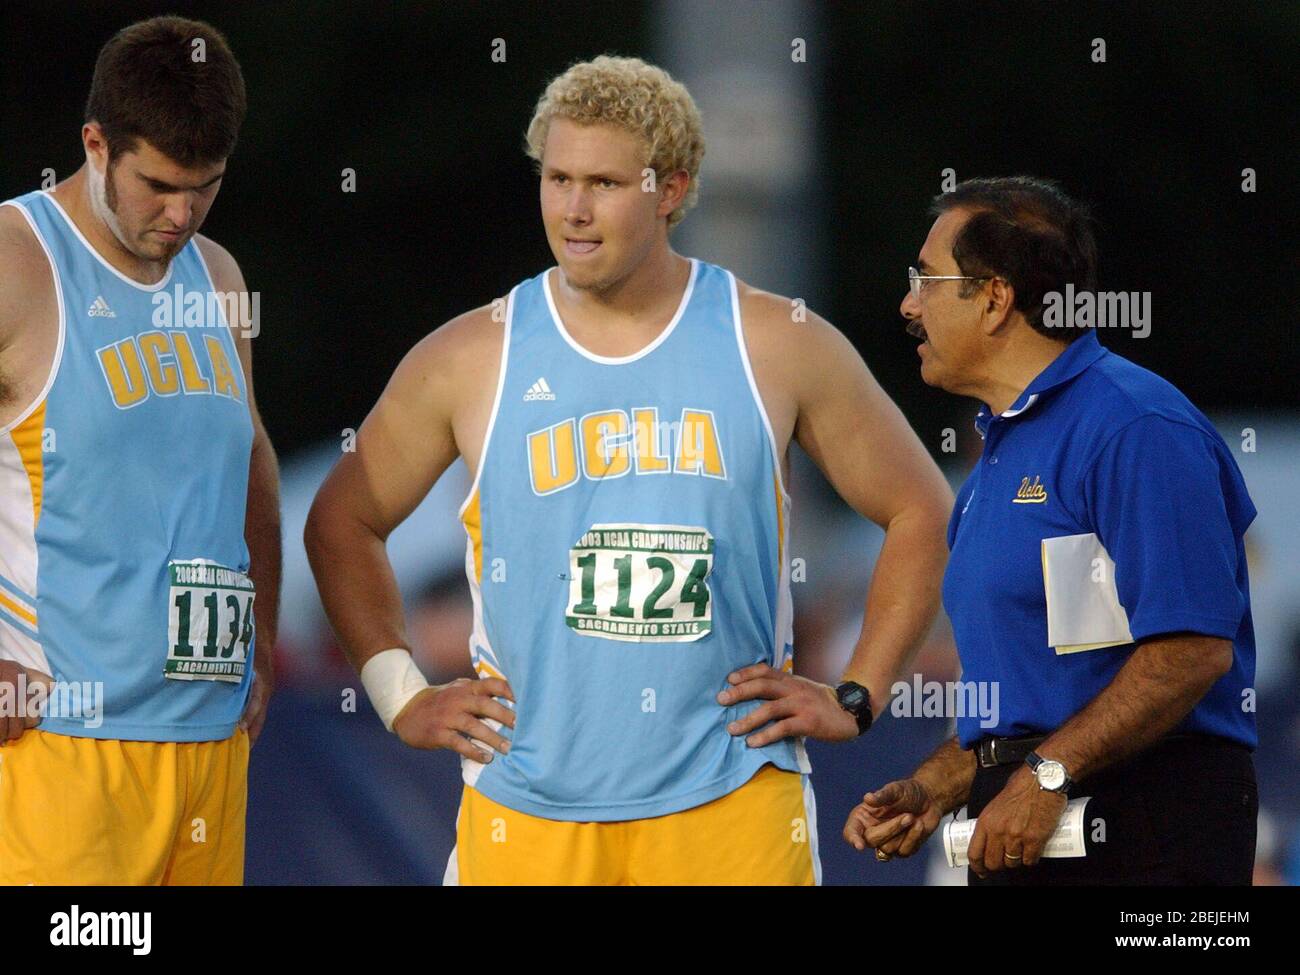 https://c8.alamy.com/comp/2BEJEHM/sacramento-united-states-13th-june-2003-ucla-bruins-coach-art-venegas-right-talks-with-scott-wiegand-left-and-dan-ames-center-during-shot-put-in-the-ncaa-track-and-field-championships-at-hornet-stadium-friday-june-13-2003-in-sacramento-calif-photo-via-credit-newscomalamy-live-news-2BEJEHM.jpg